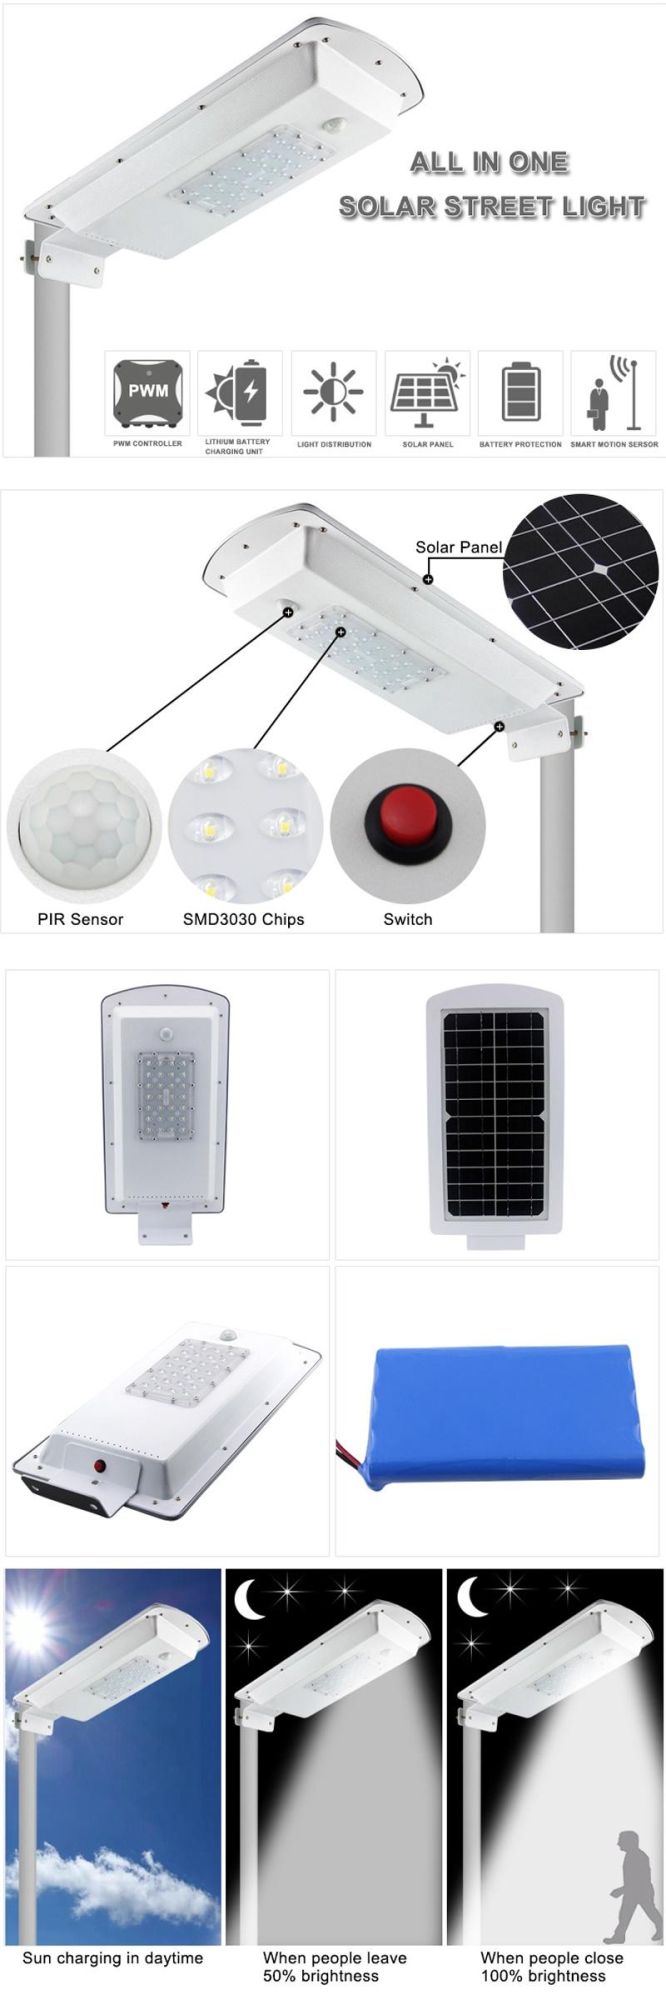 8W 10W Solar Panel, LED Light, Intelligent Controller and Lithium Battery All in One Garden Lights, Energy Saving Outdoor System Solar Street Light